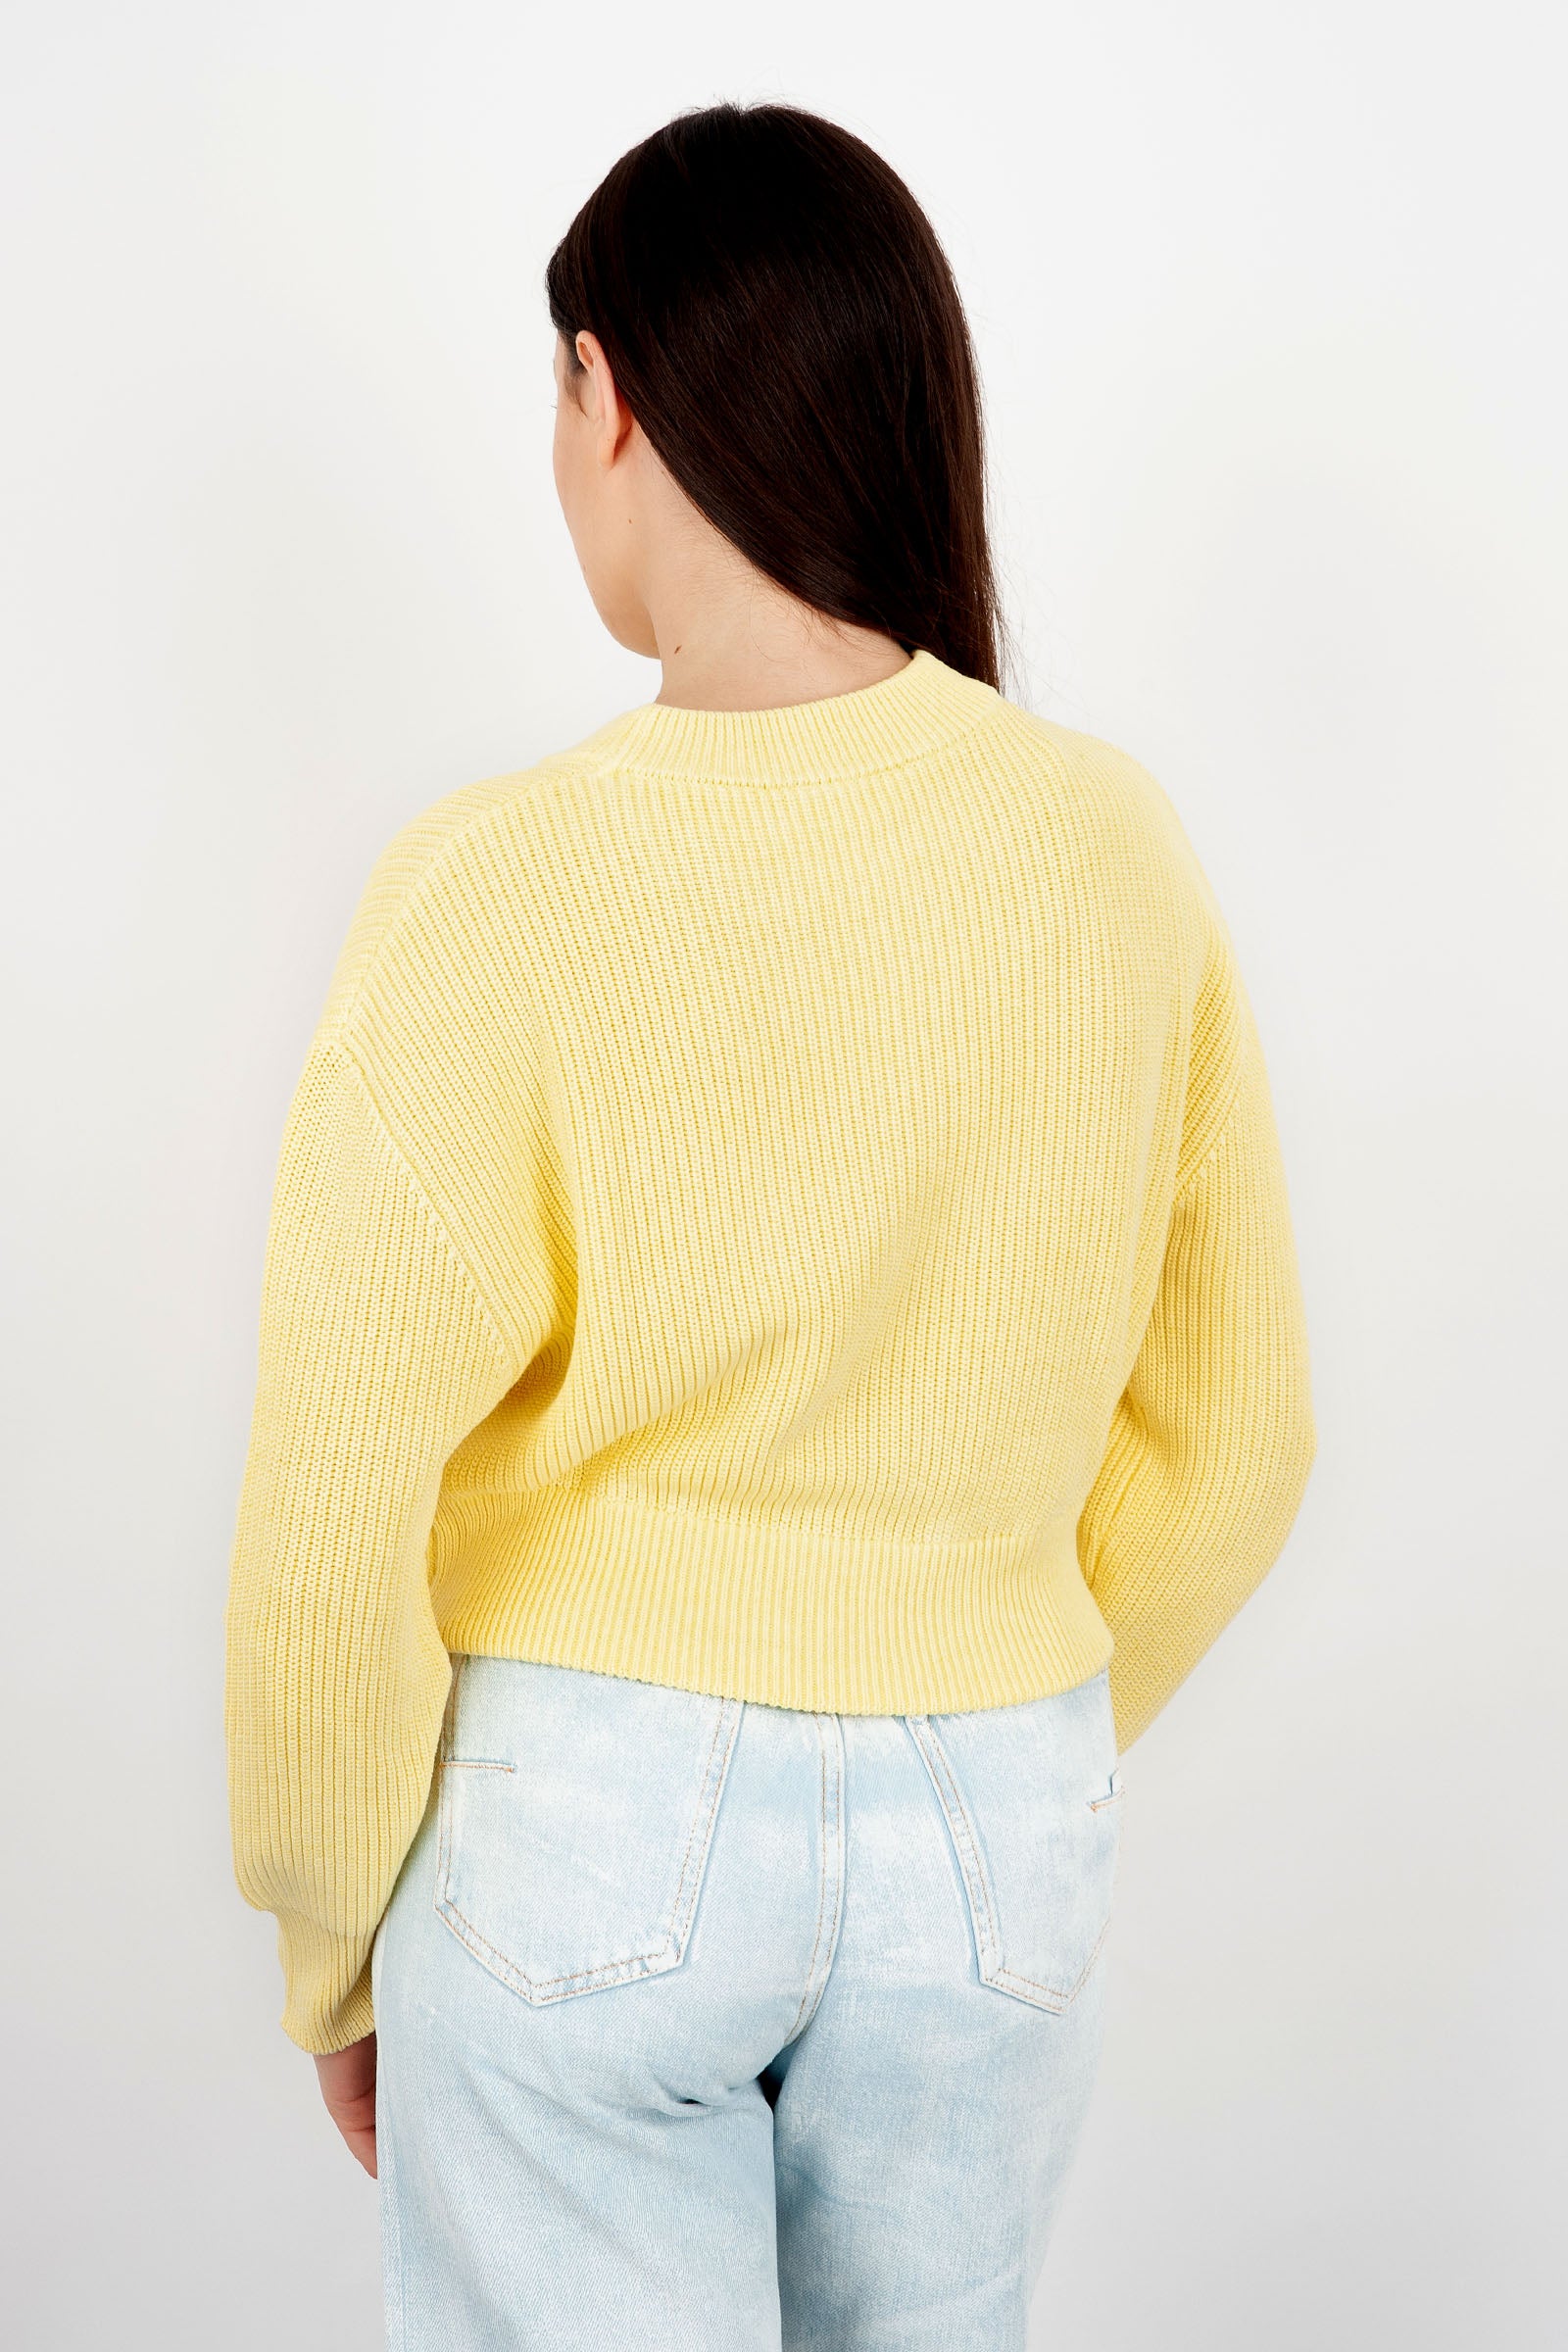 Absolut Cashmere Edith Cotton Yellow Sweater - 4